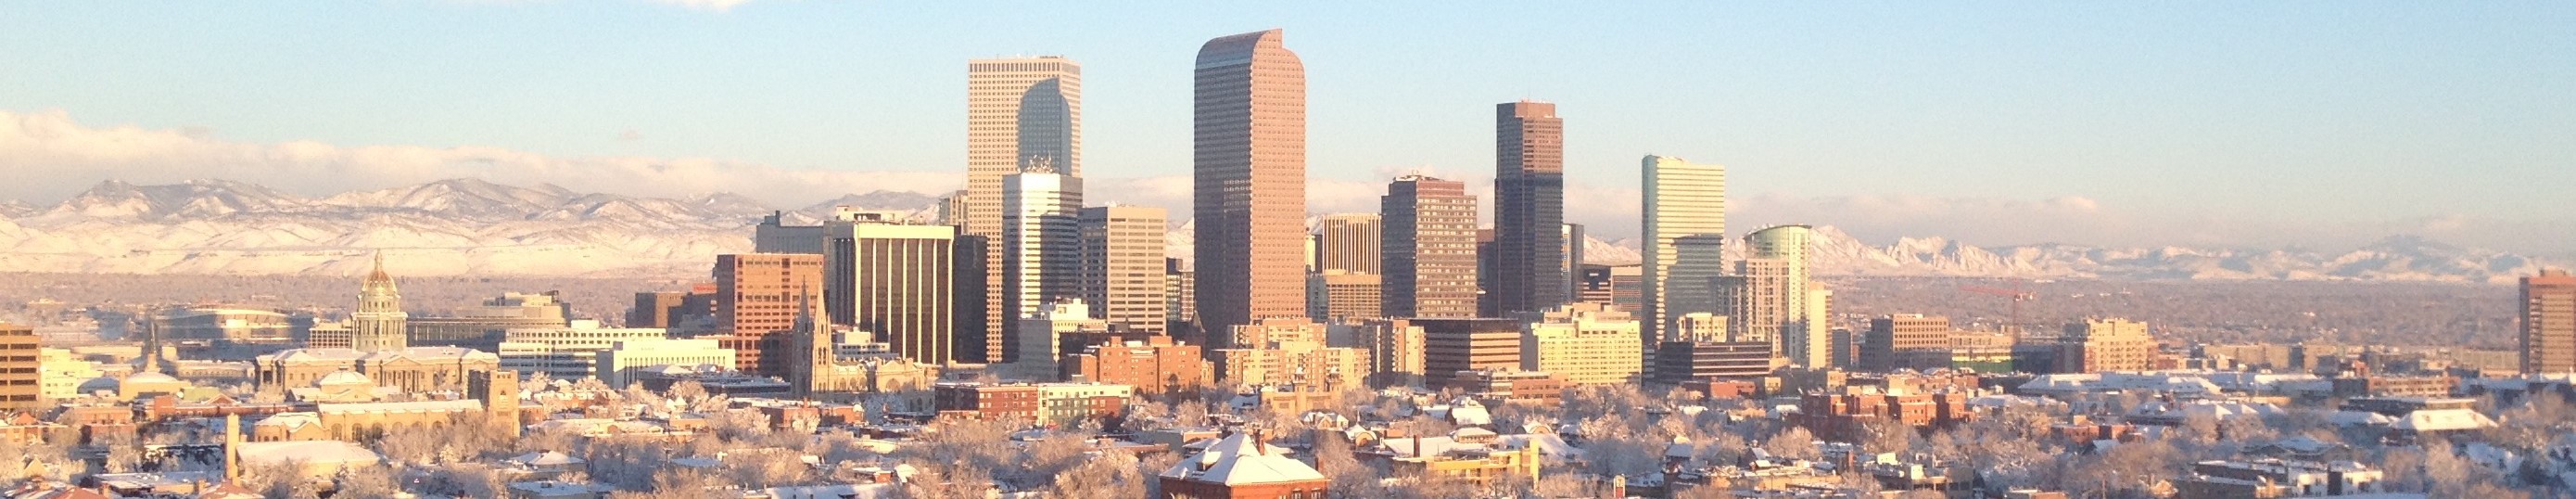 Denver -- home of this year's Gathering of Eagles